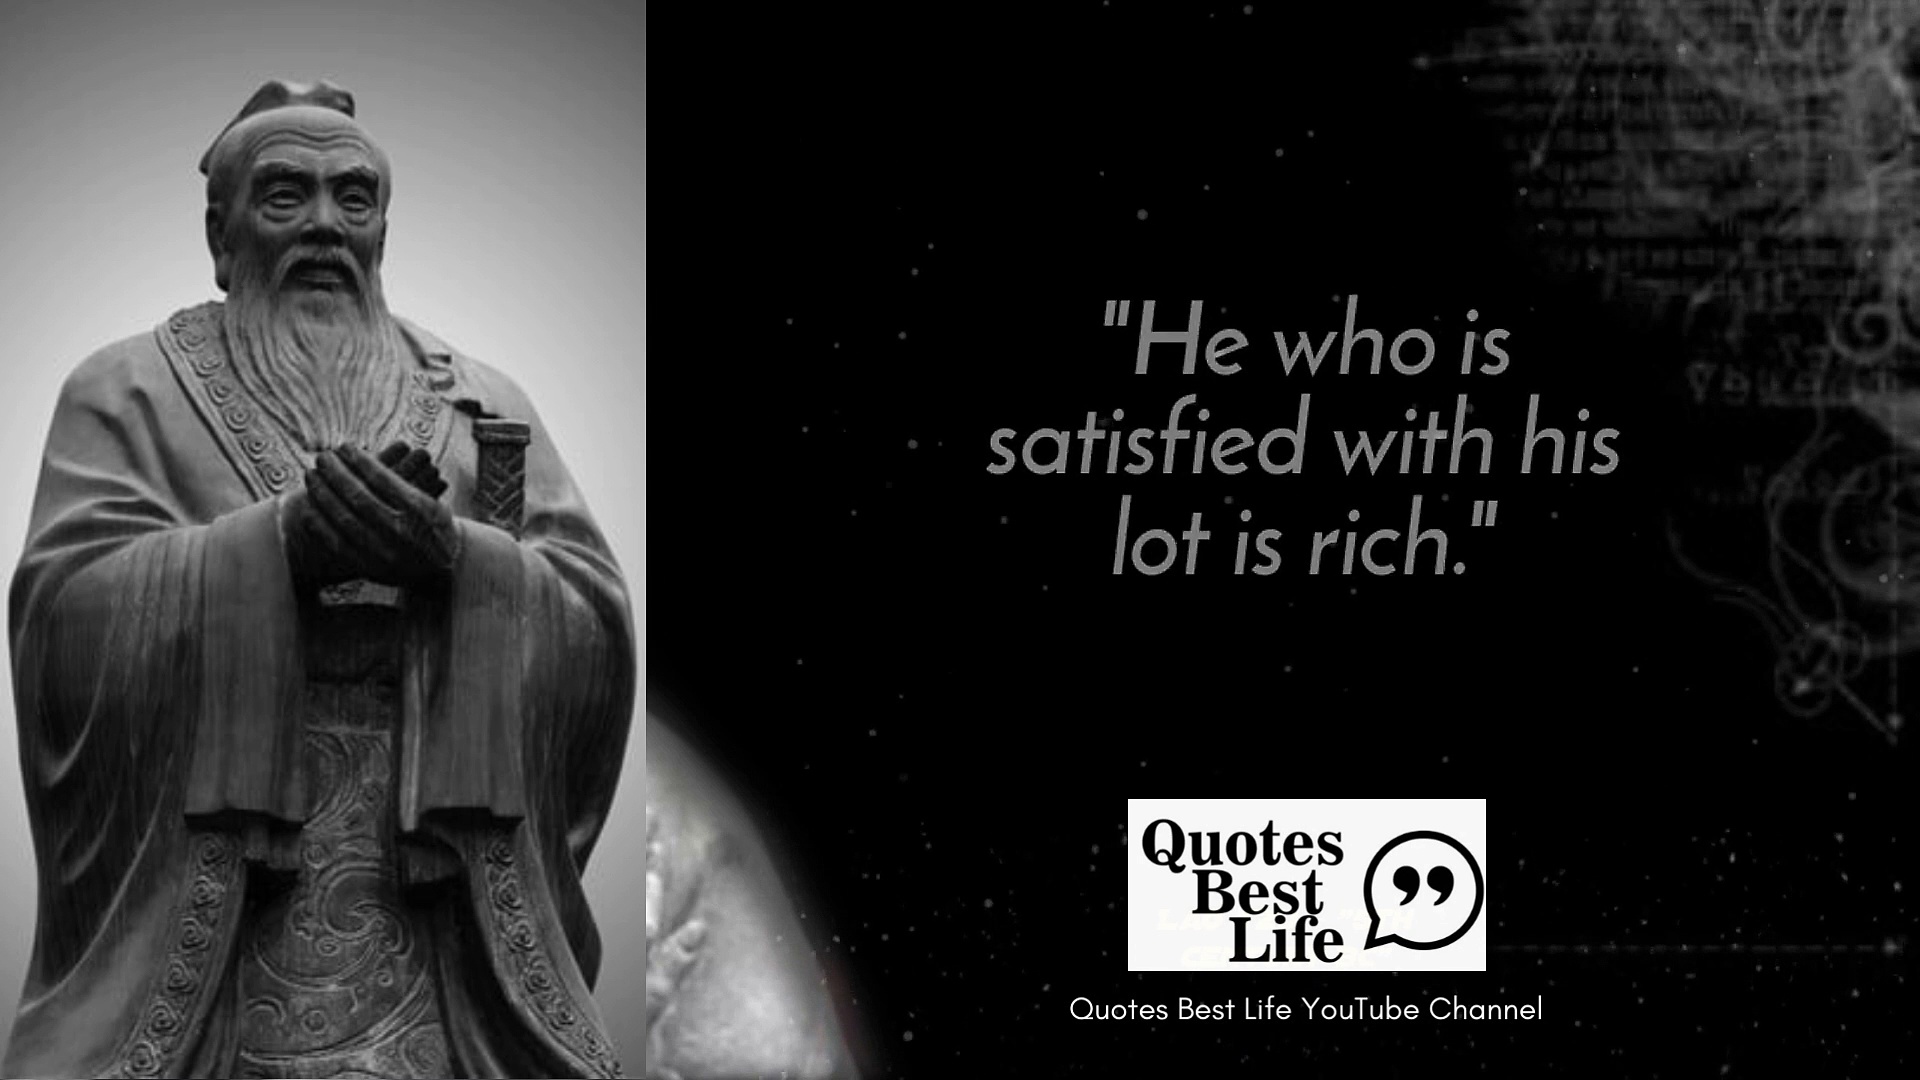 Best WISDOM Quotes of Lao Tzu that will CHANGE YOUR LIFE!